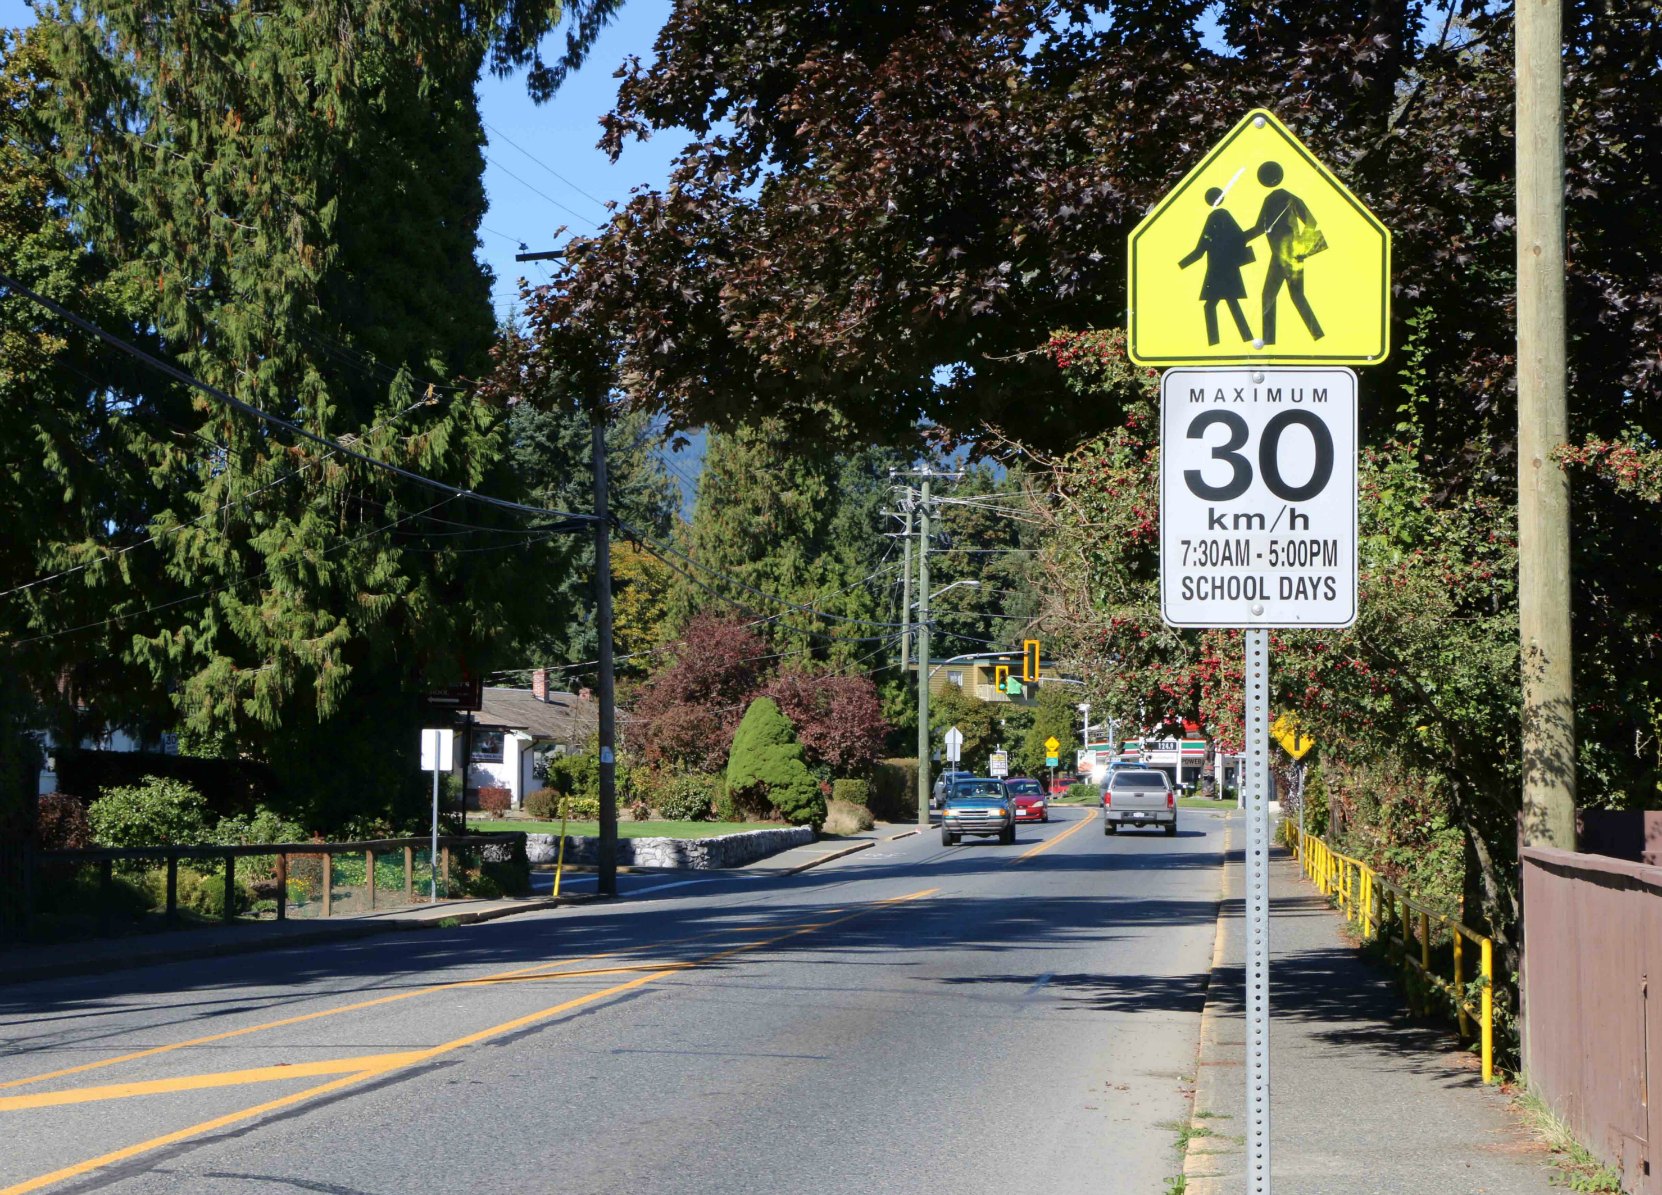 School Zone sign (Advisory) with regulatory sign attached for posted 30 km/h speed limit. Note that this sign contains hours the School Zones is in effect, in this case 7:30 a.m. to 5 p.m. on School Days (photo by WestCoastDriverTraining.com)